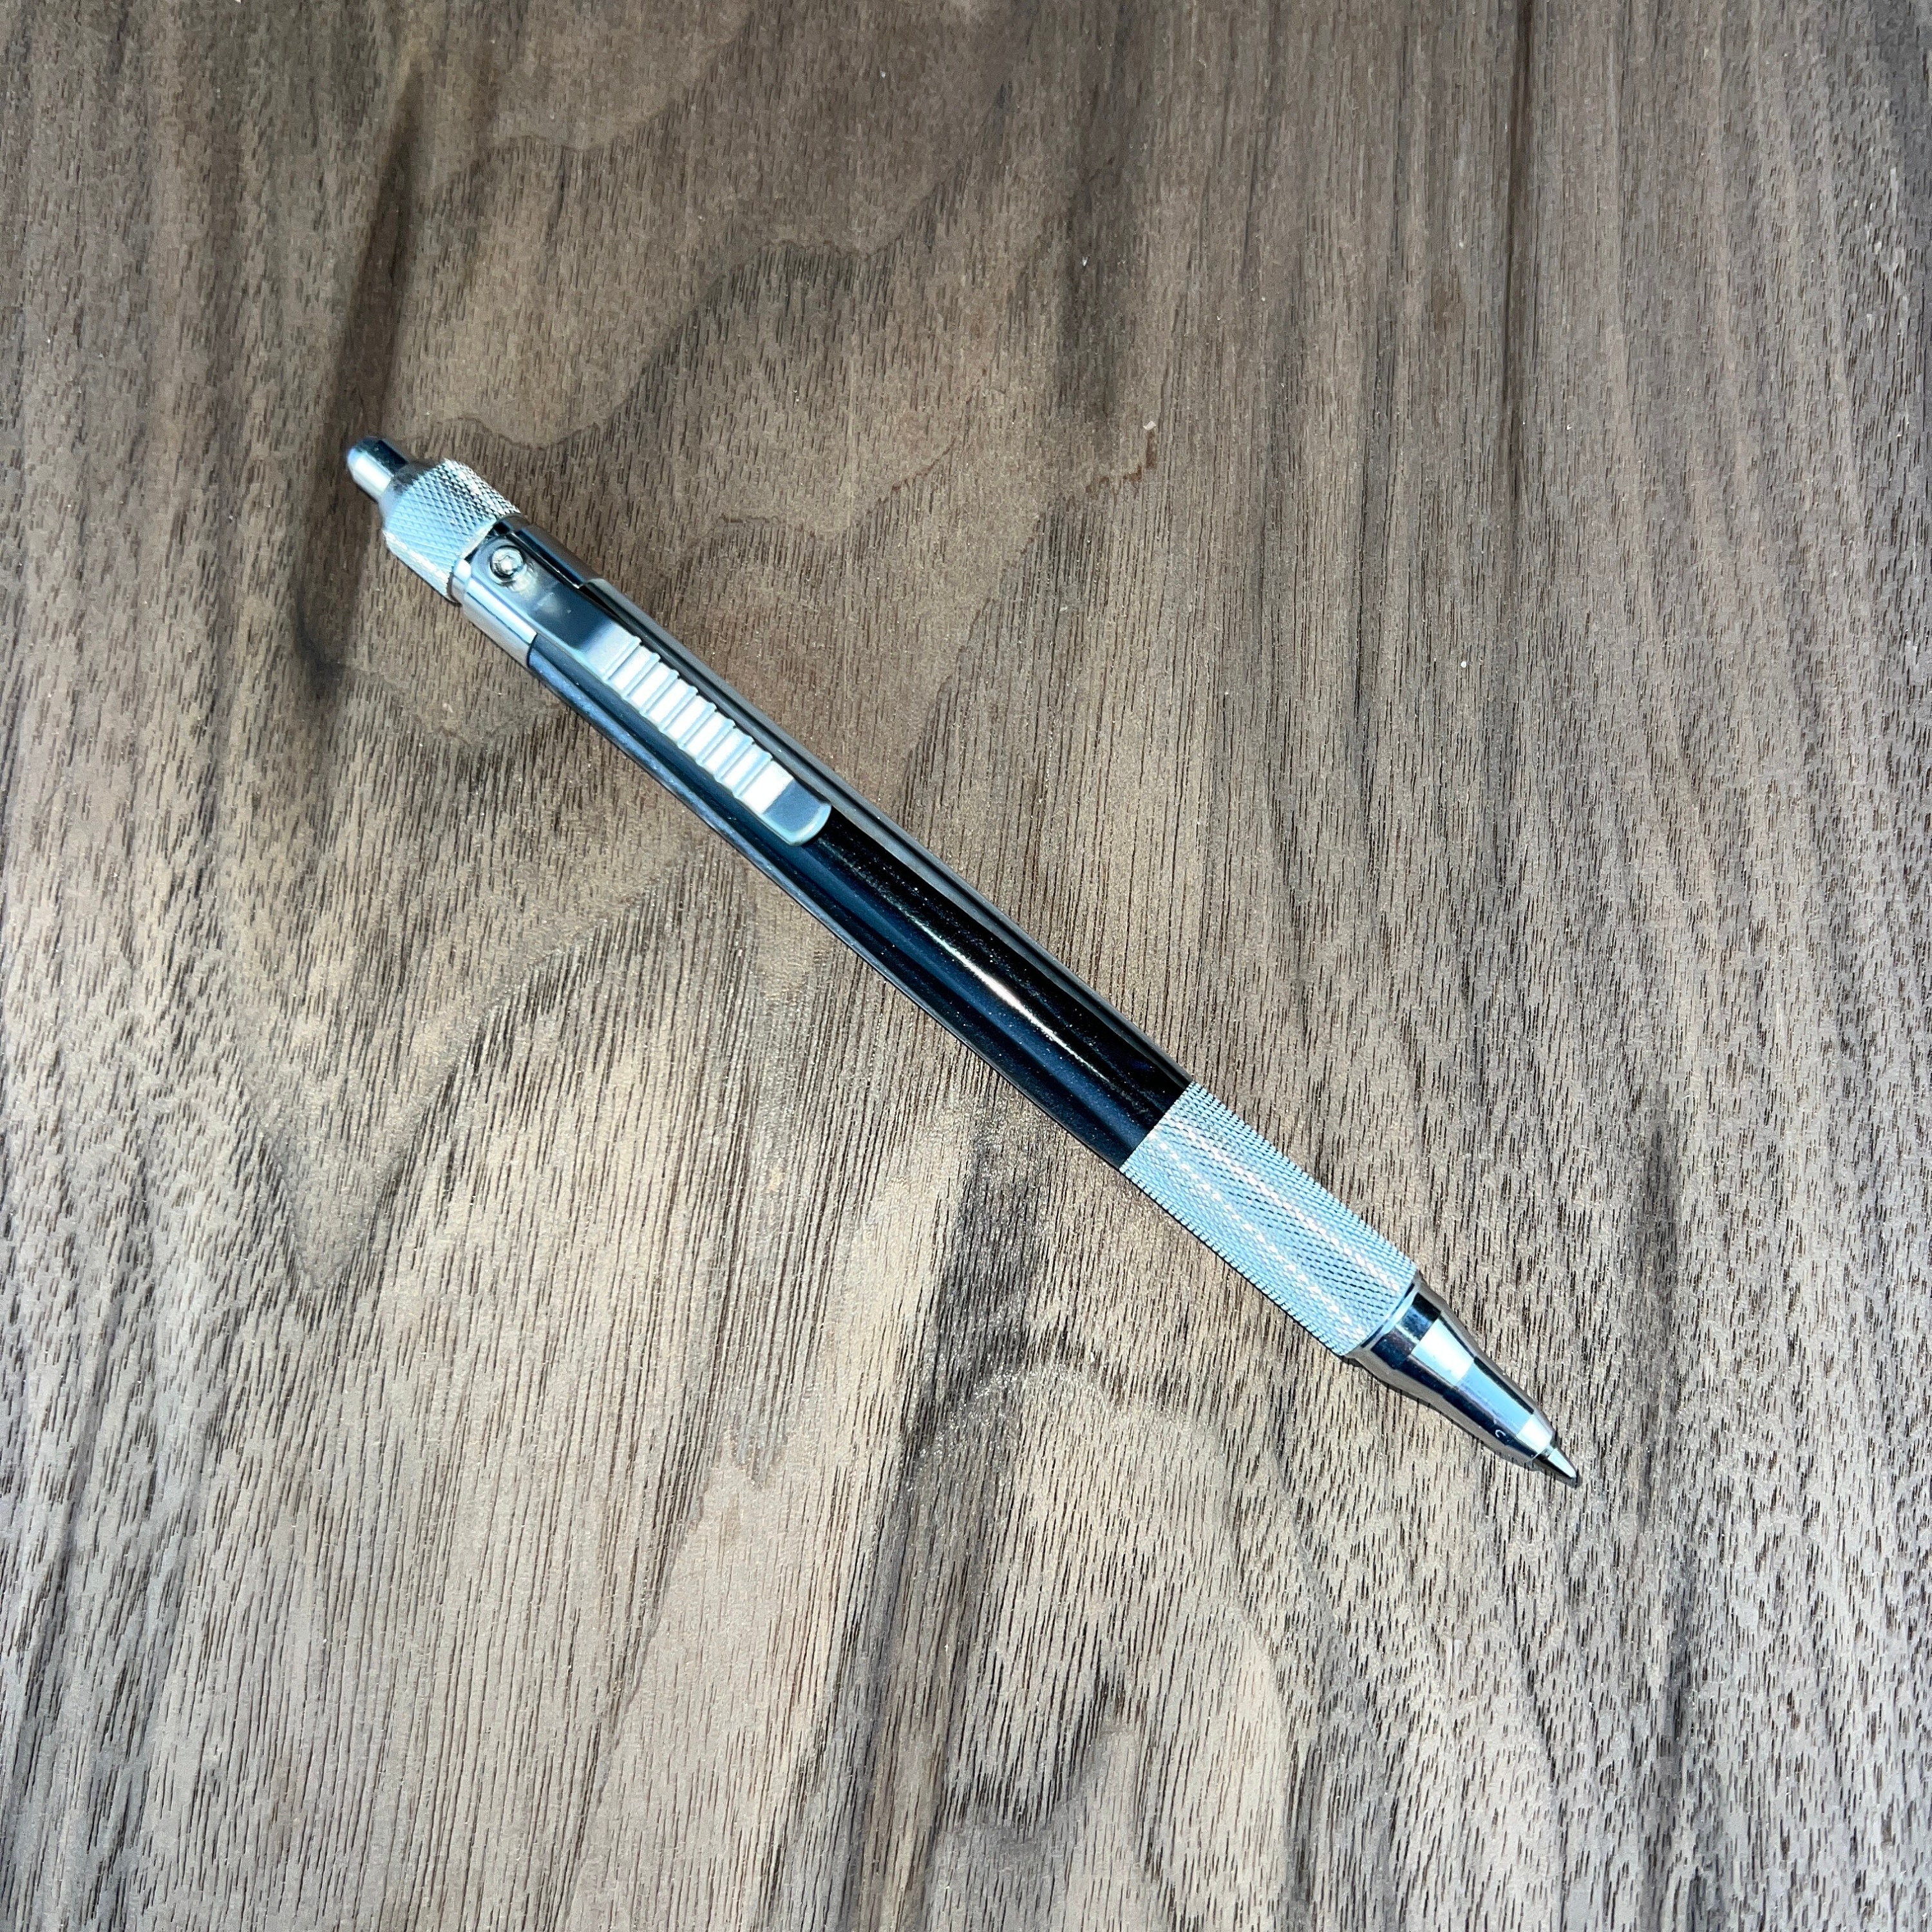 Opaque White Gel Pen - One Pen - For writing on dark surfaces